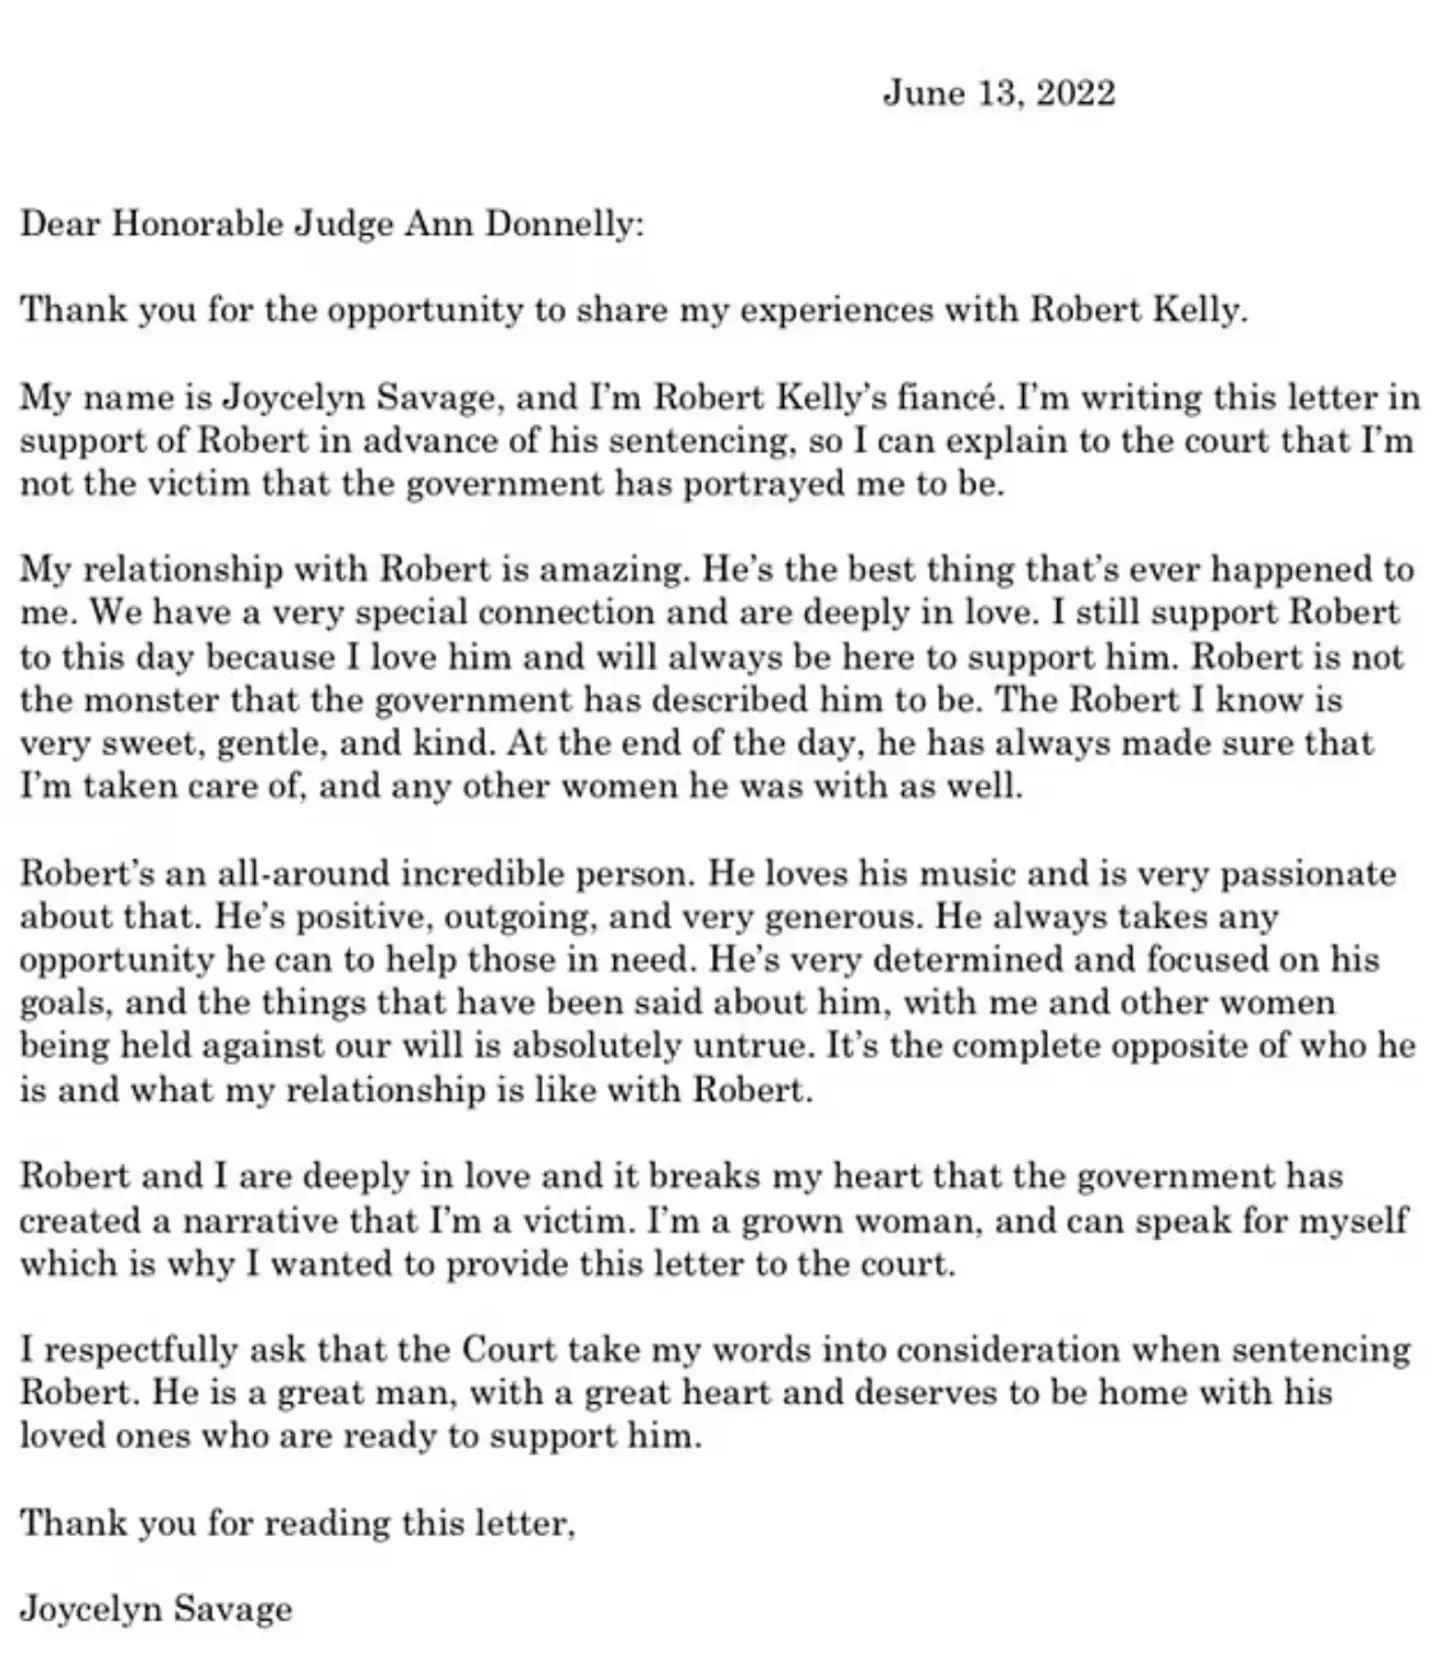 Joycelyn Savage gave this letter to Judge Ann Donnelly before R Kelly was sentenced.